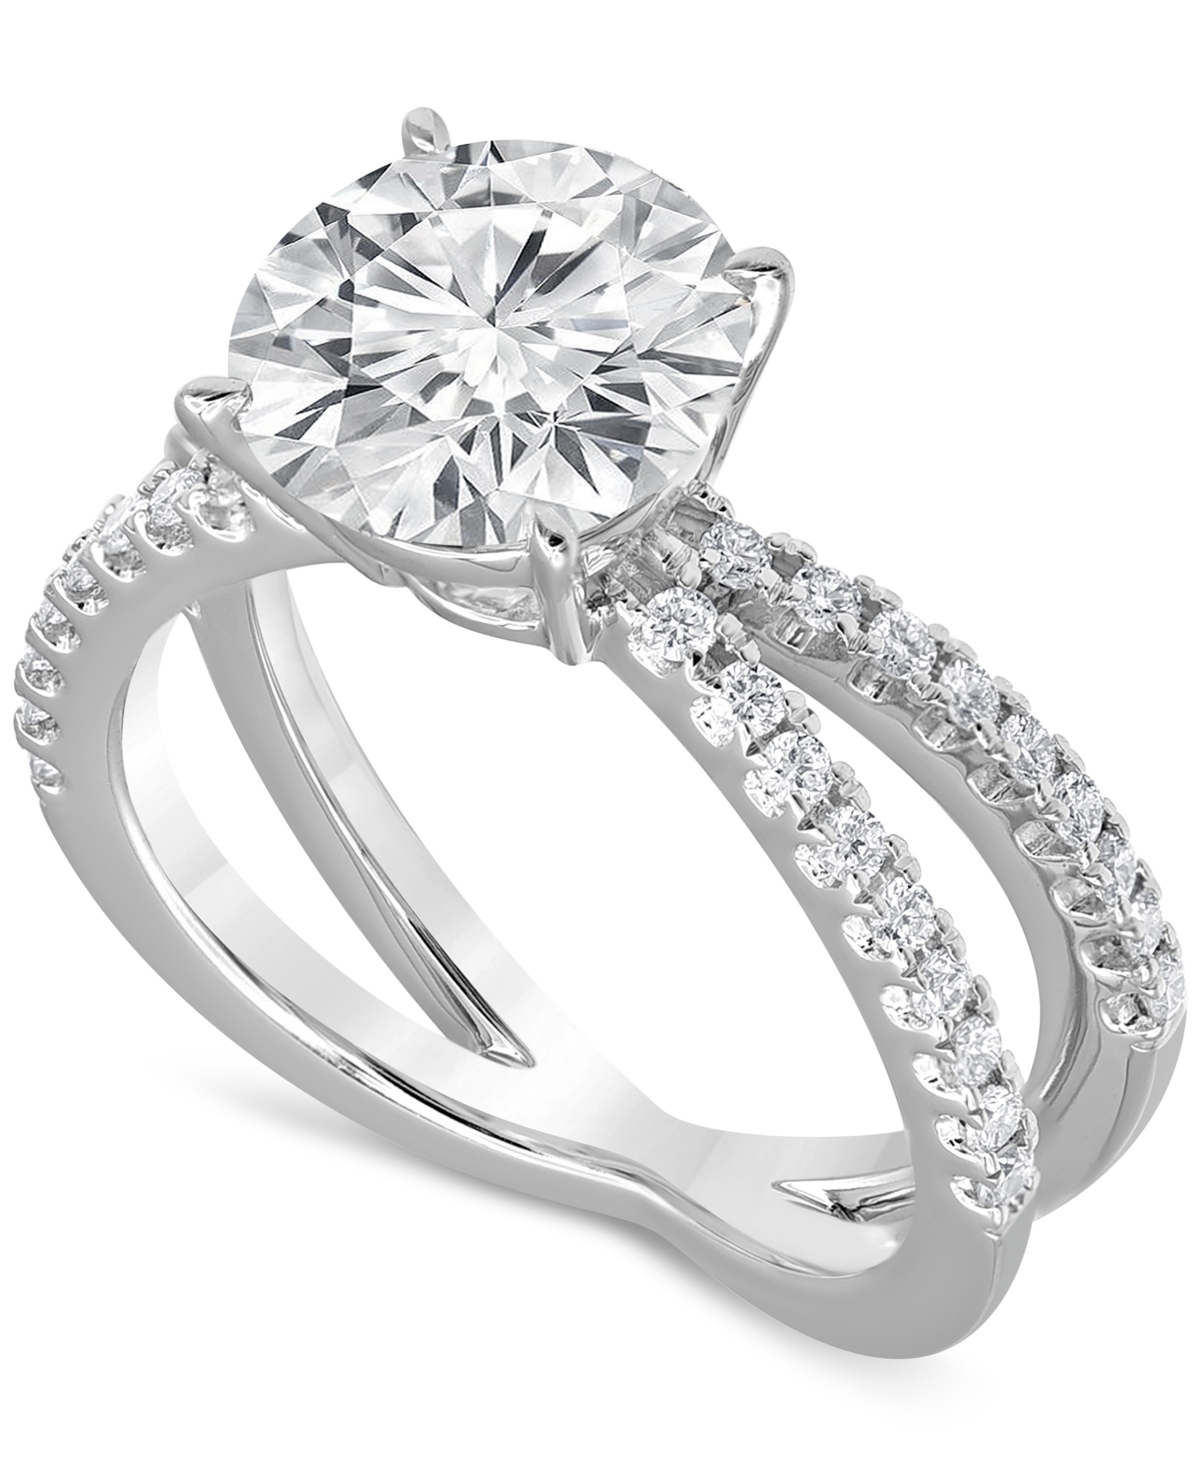 Certified Lab Grown Diamond Solitaire X Engagement Ring (3-3/8 ct. t.w.) in 14k White Gold - White Gold